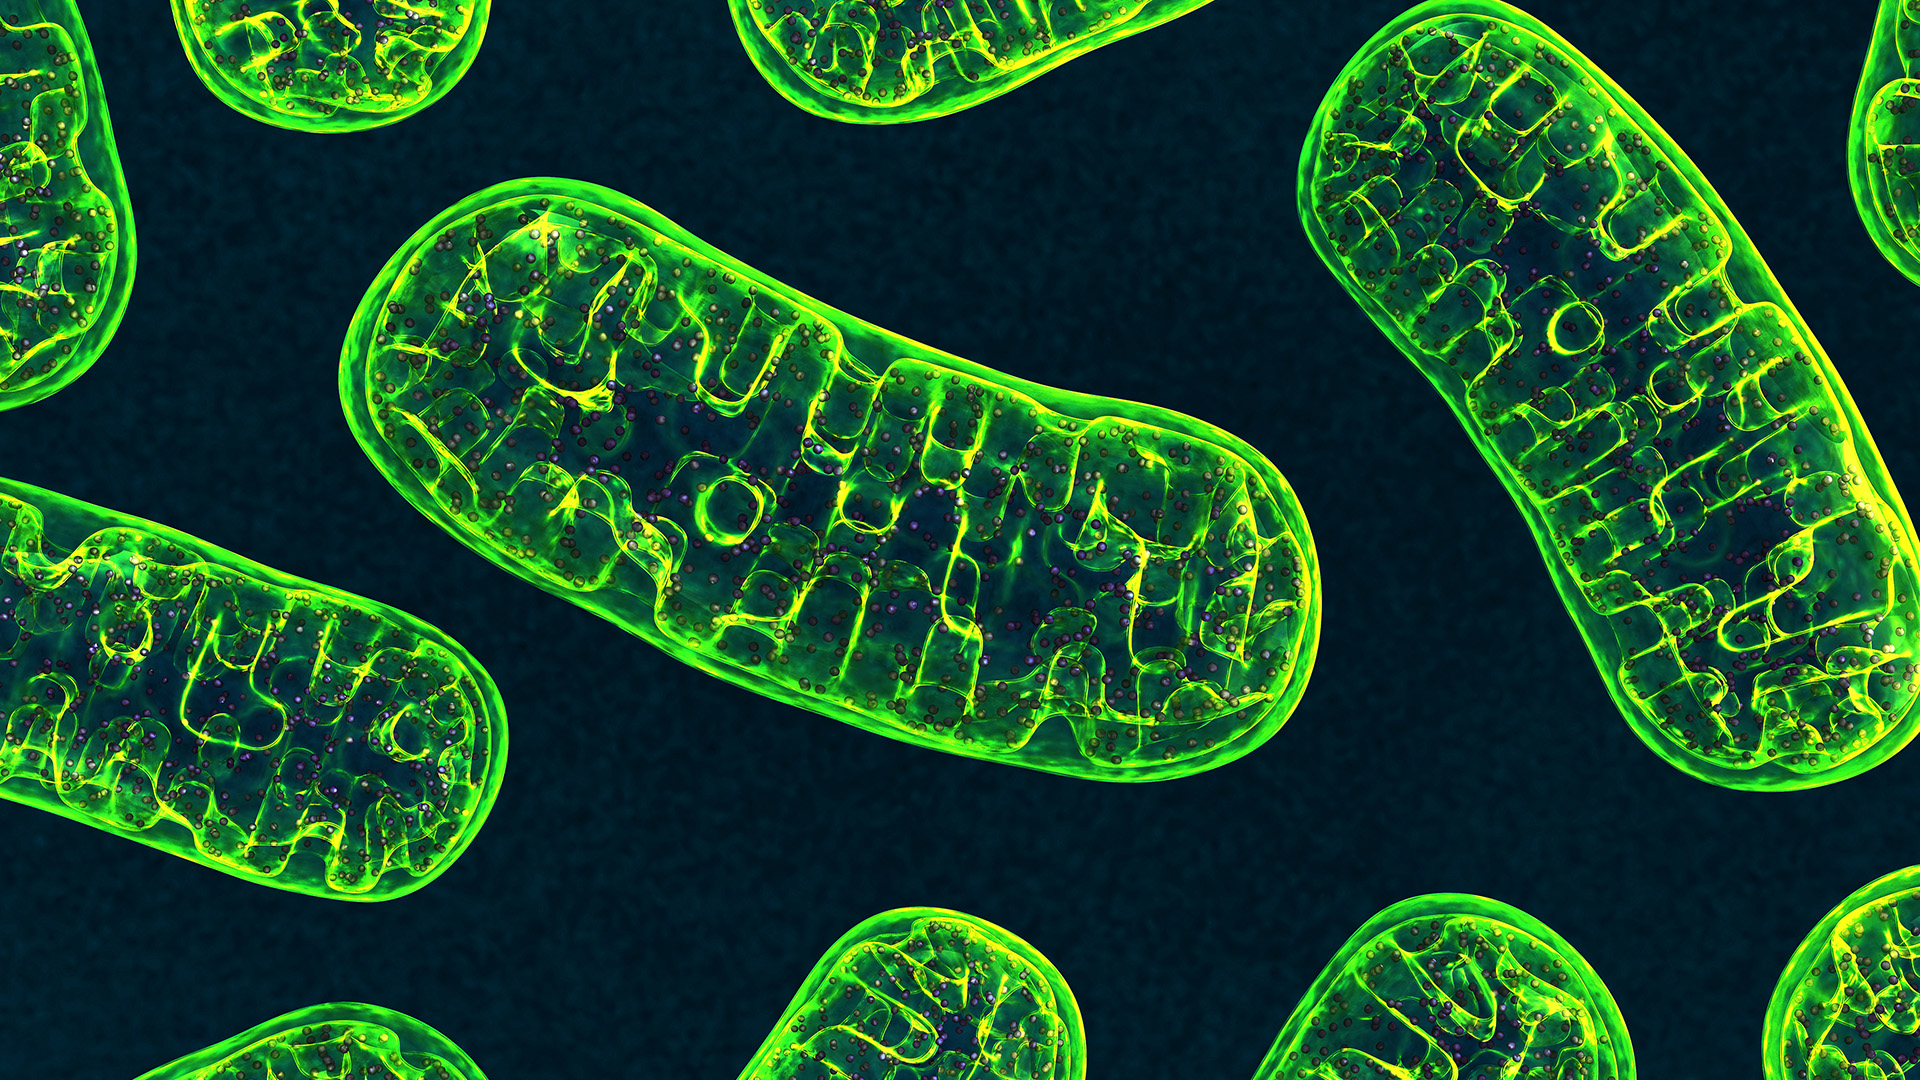 Unraveling the Role of a Key Mitochondrial Protein